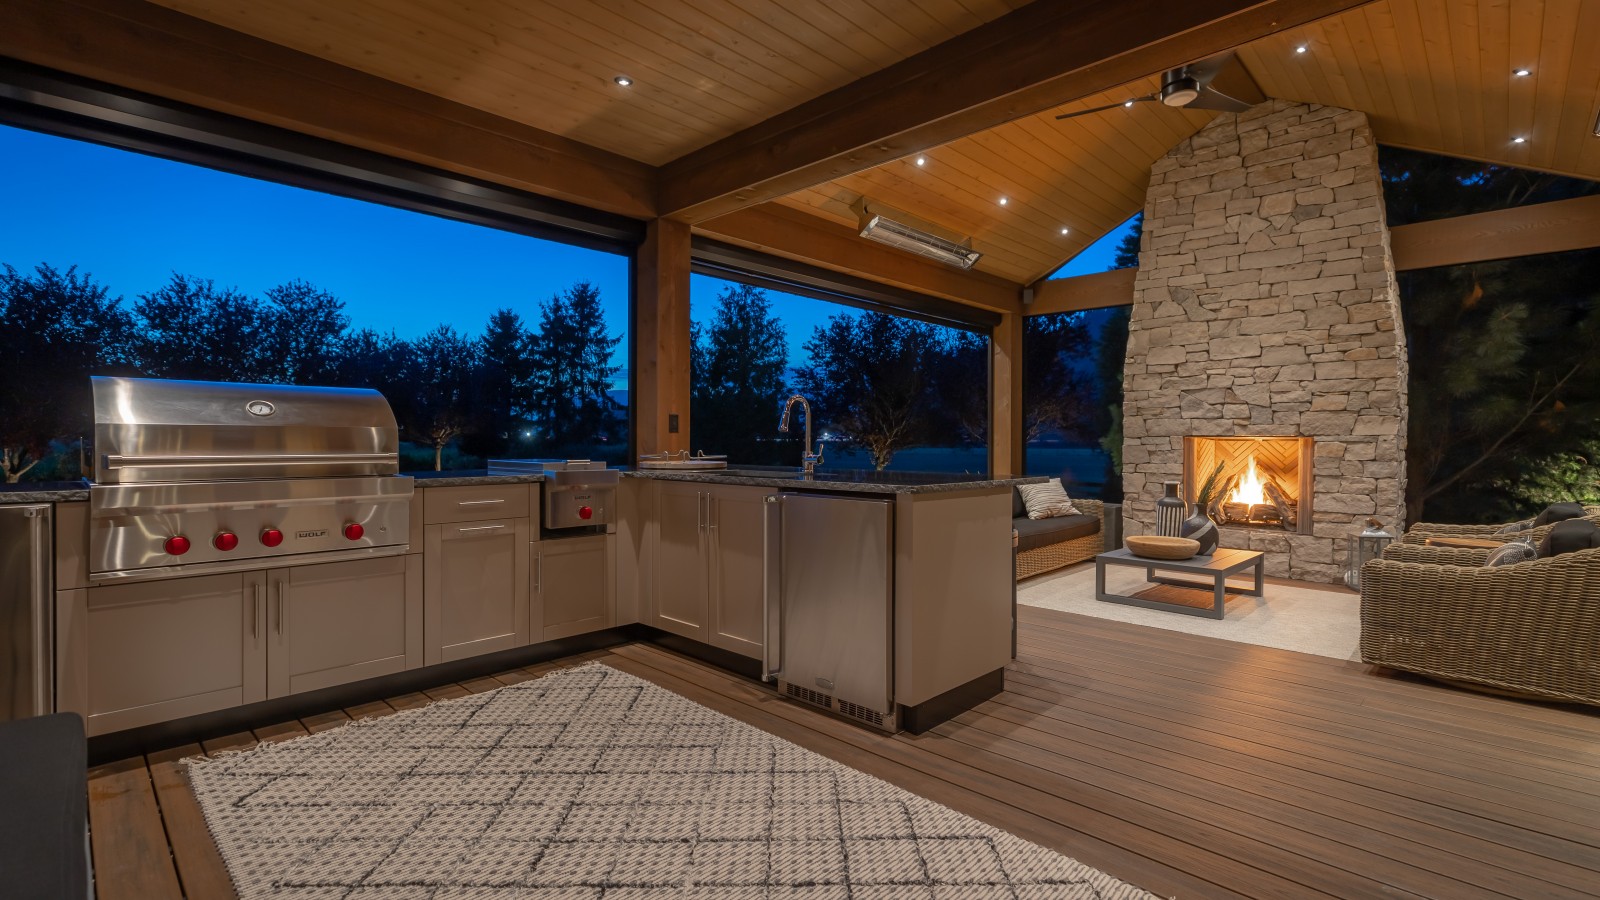 outdoor kitchen of your dreams